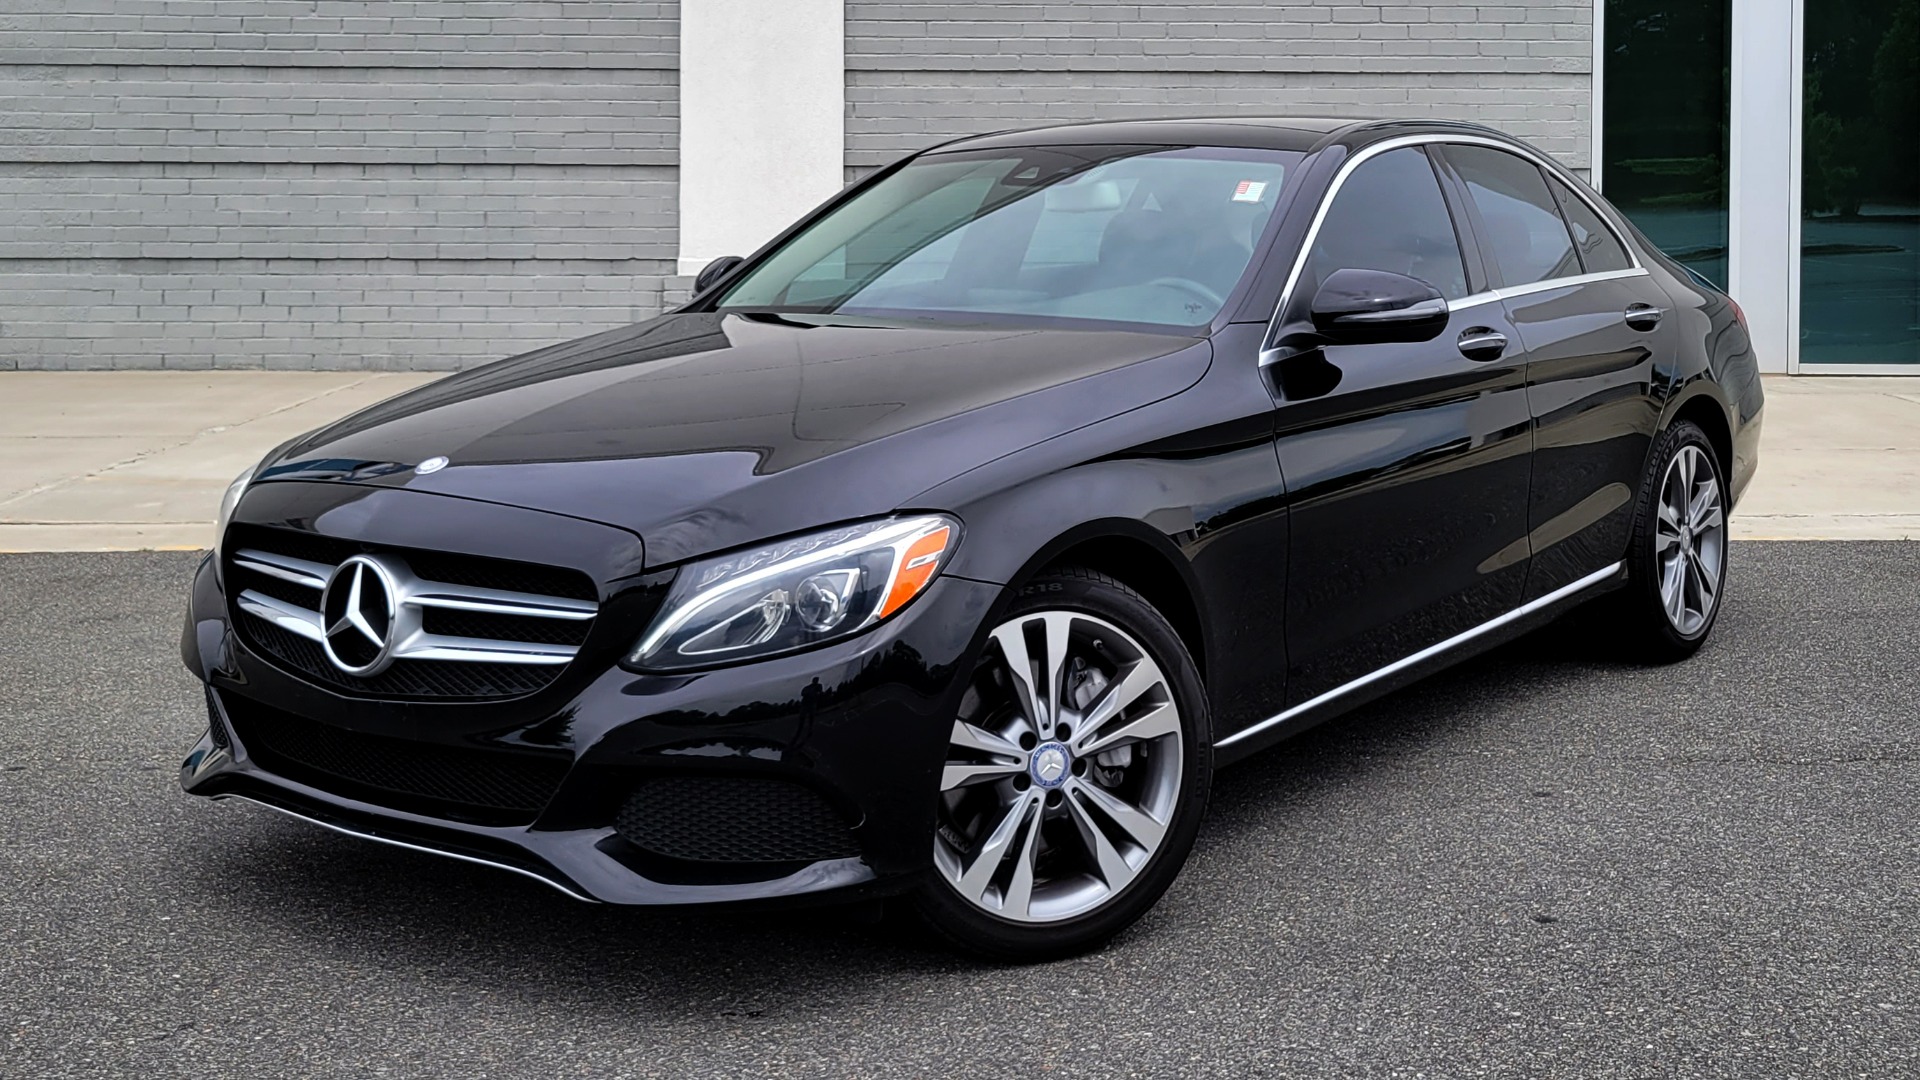 Used 2017 Mercedes-Benz C-CLASS C 300 4MATIC SEDAN / PREMIUM / BSA / BURMESTER / PANO-ROOF for sale $26,995 at Formula Imports in Charlotte NC 28227 7